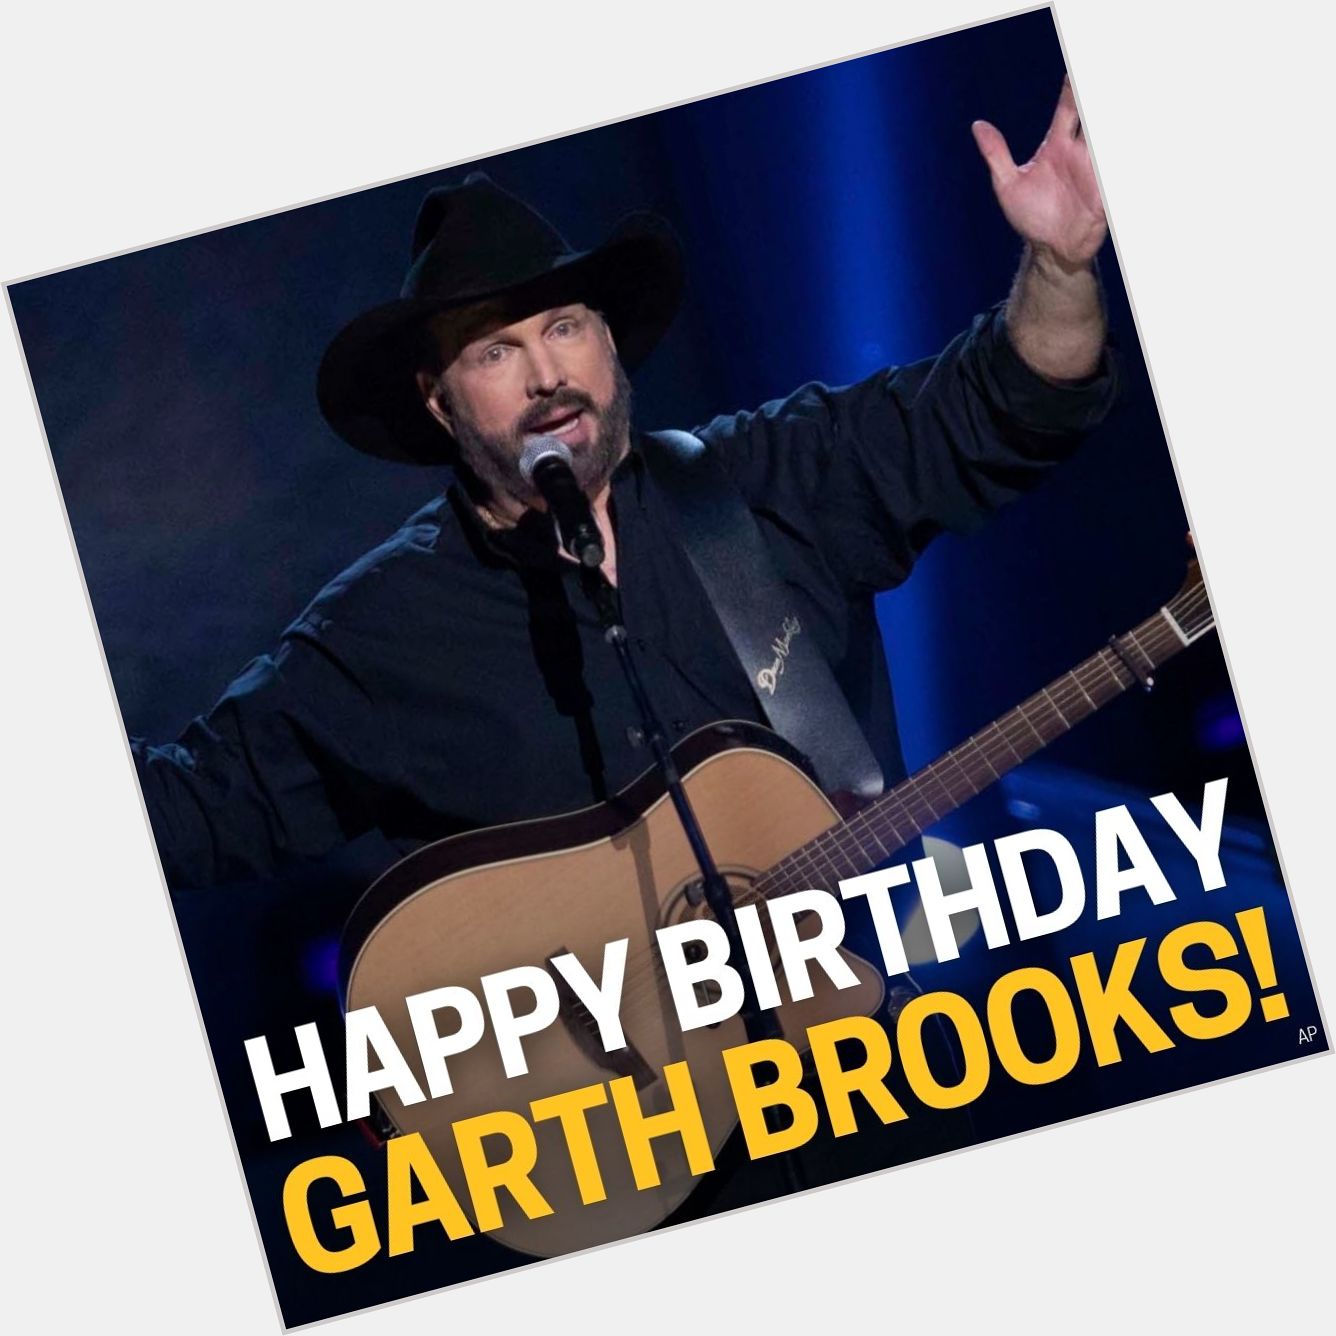    Happy Birthday to the one and only, Garth Brooks!~   